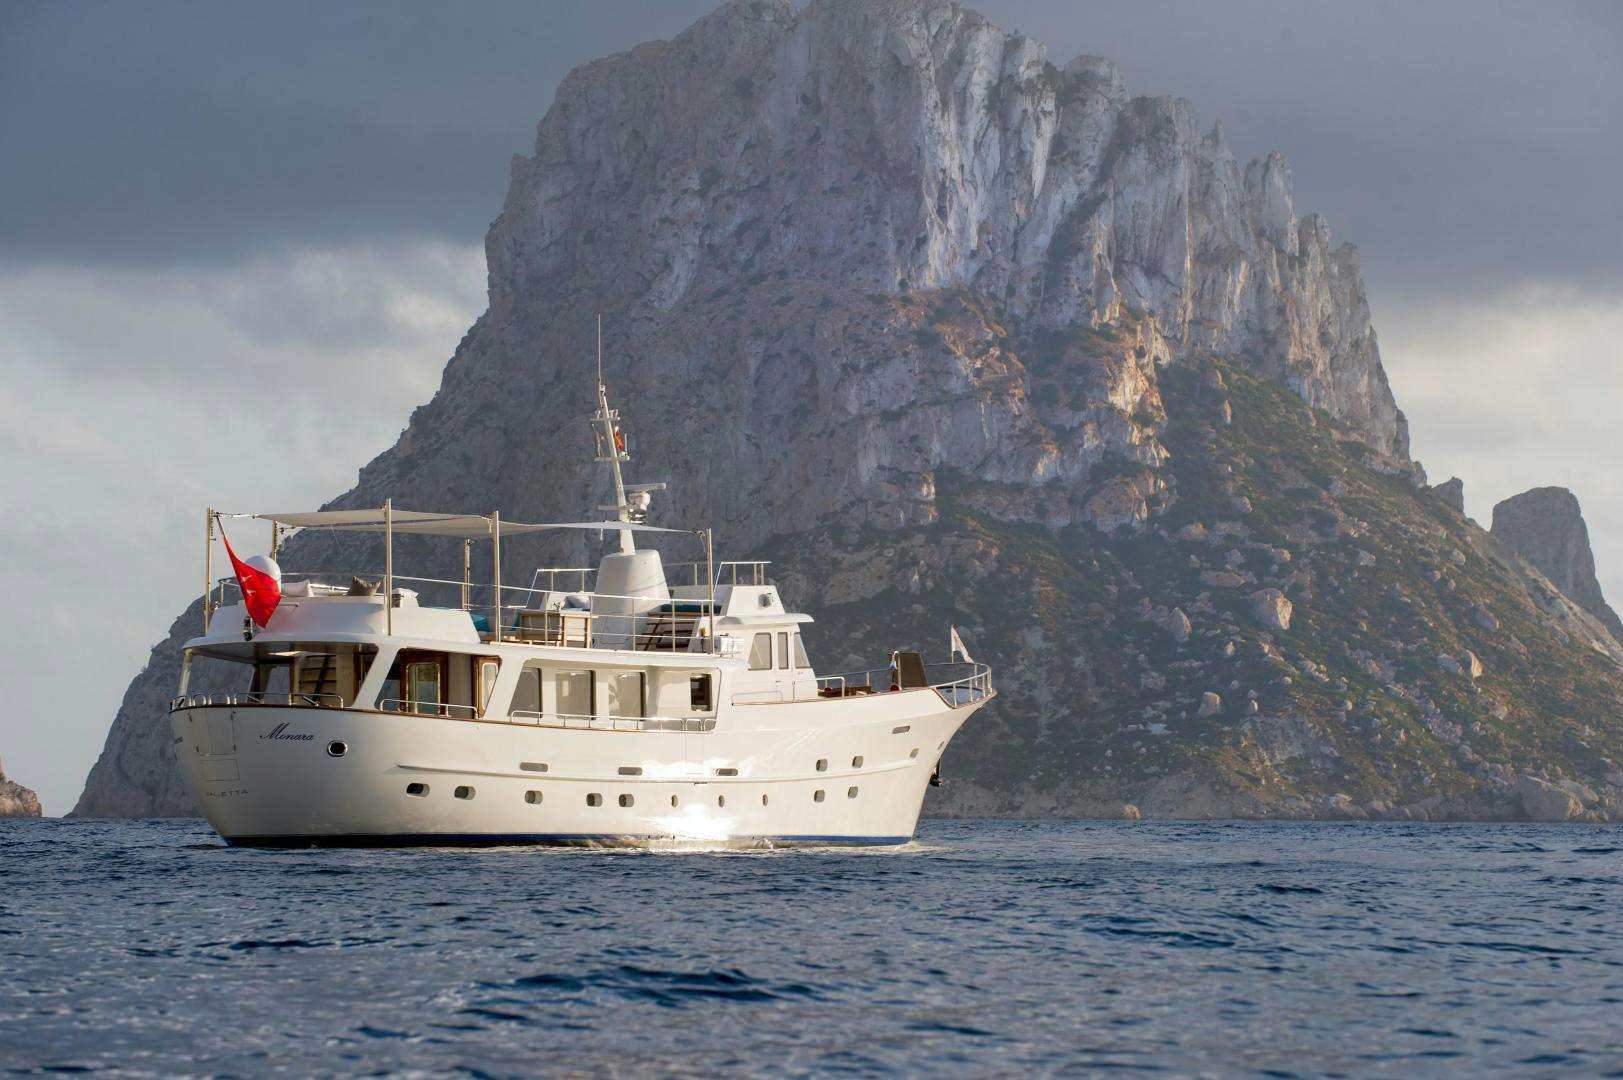 MONARA Yacht for Sale in None, 84' 7 (25.8m) 1969 Feadship